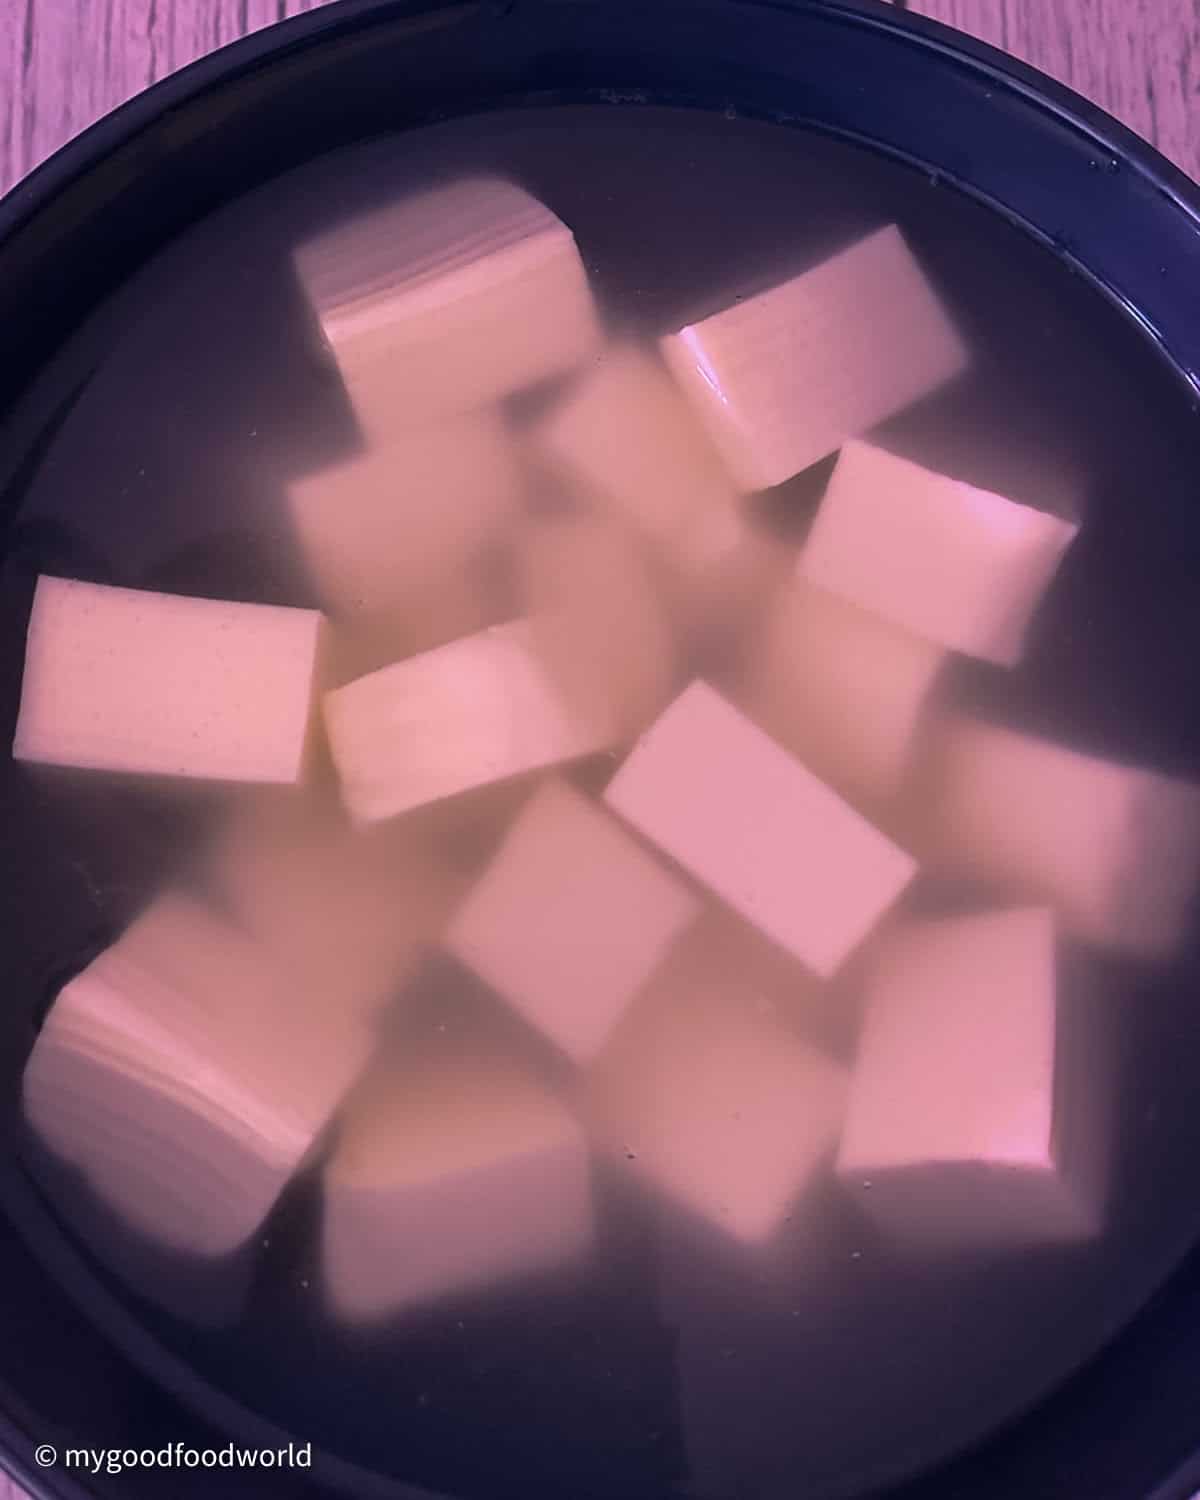 Cubes of paneer, Indian cottage cheese - cut into, roughly 1 inch each, are immersed in water in a round bowl.